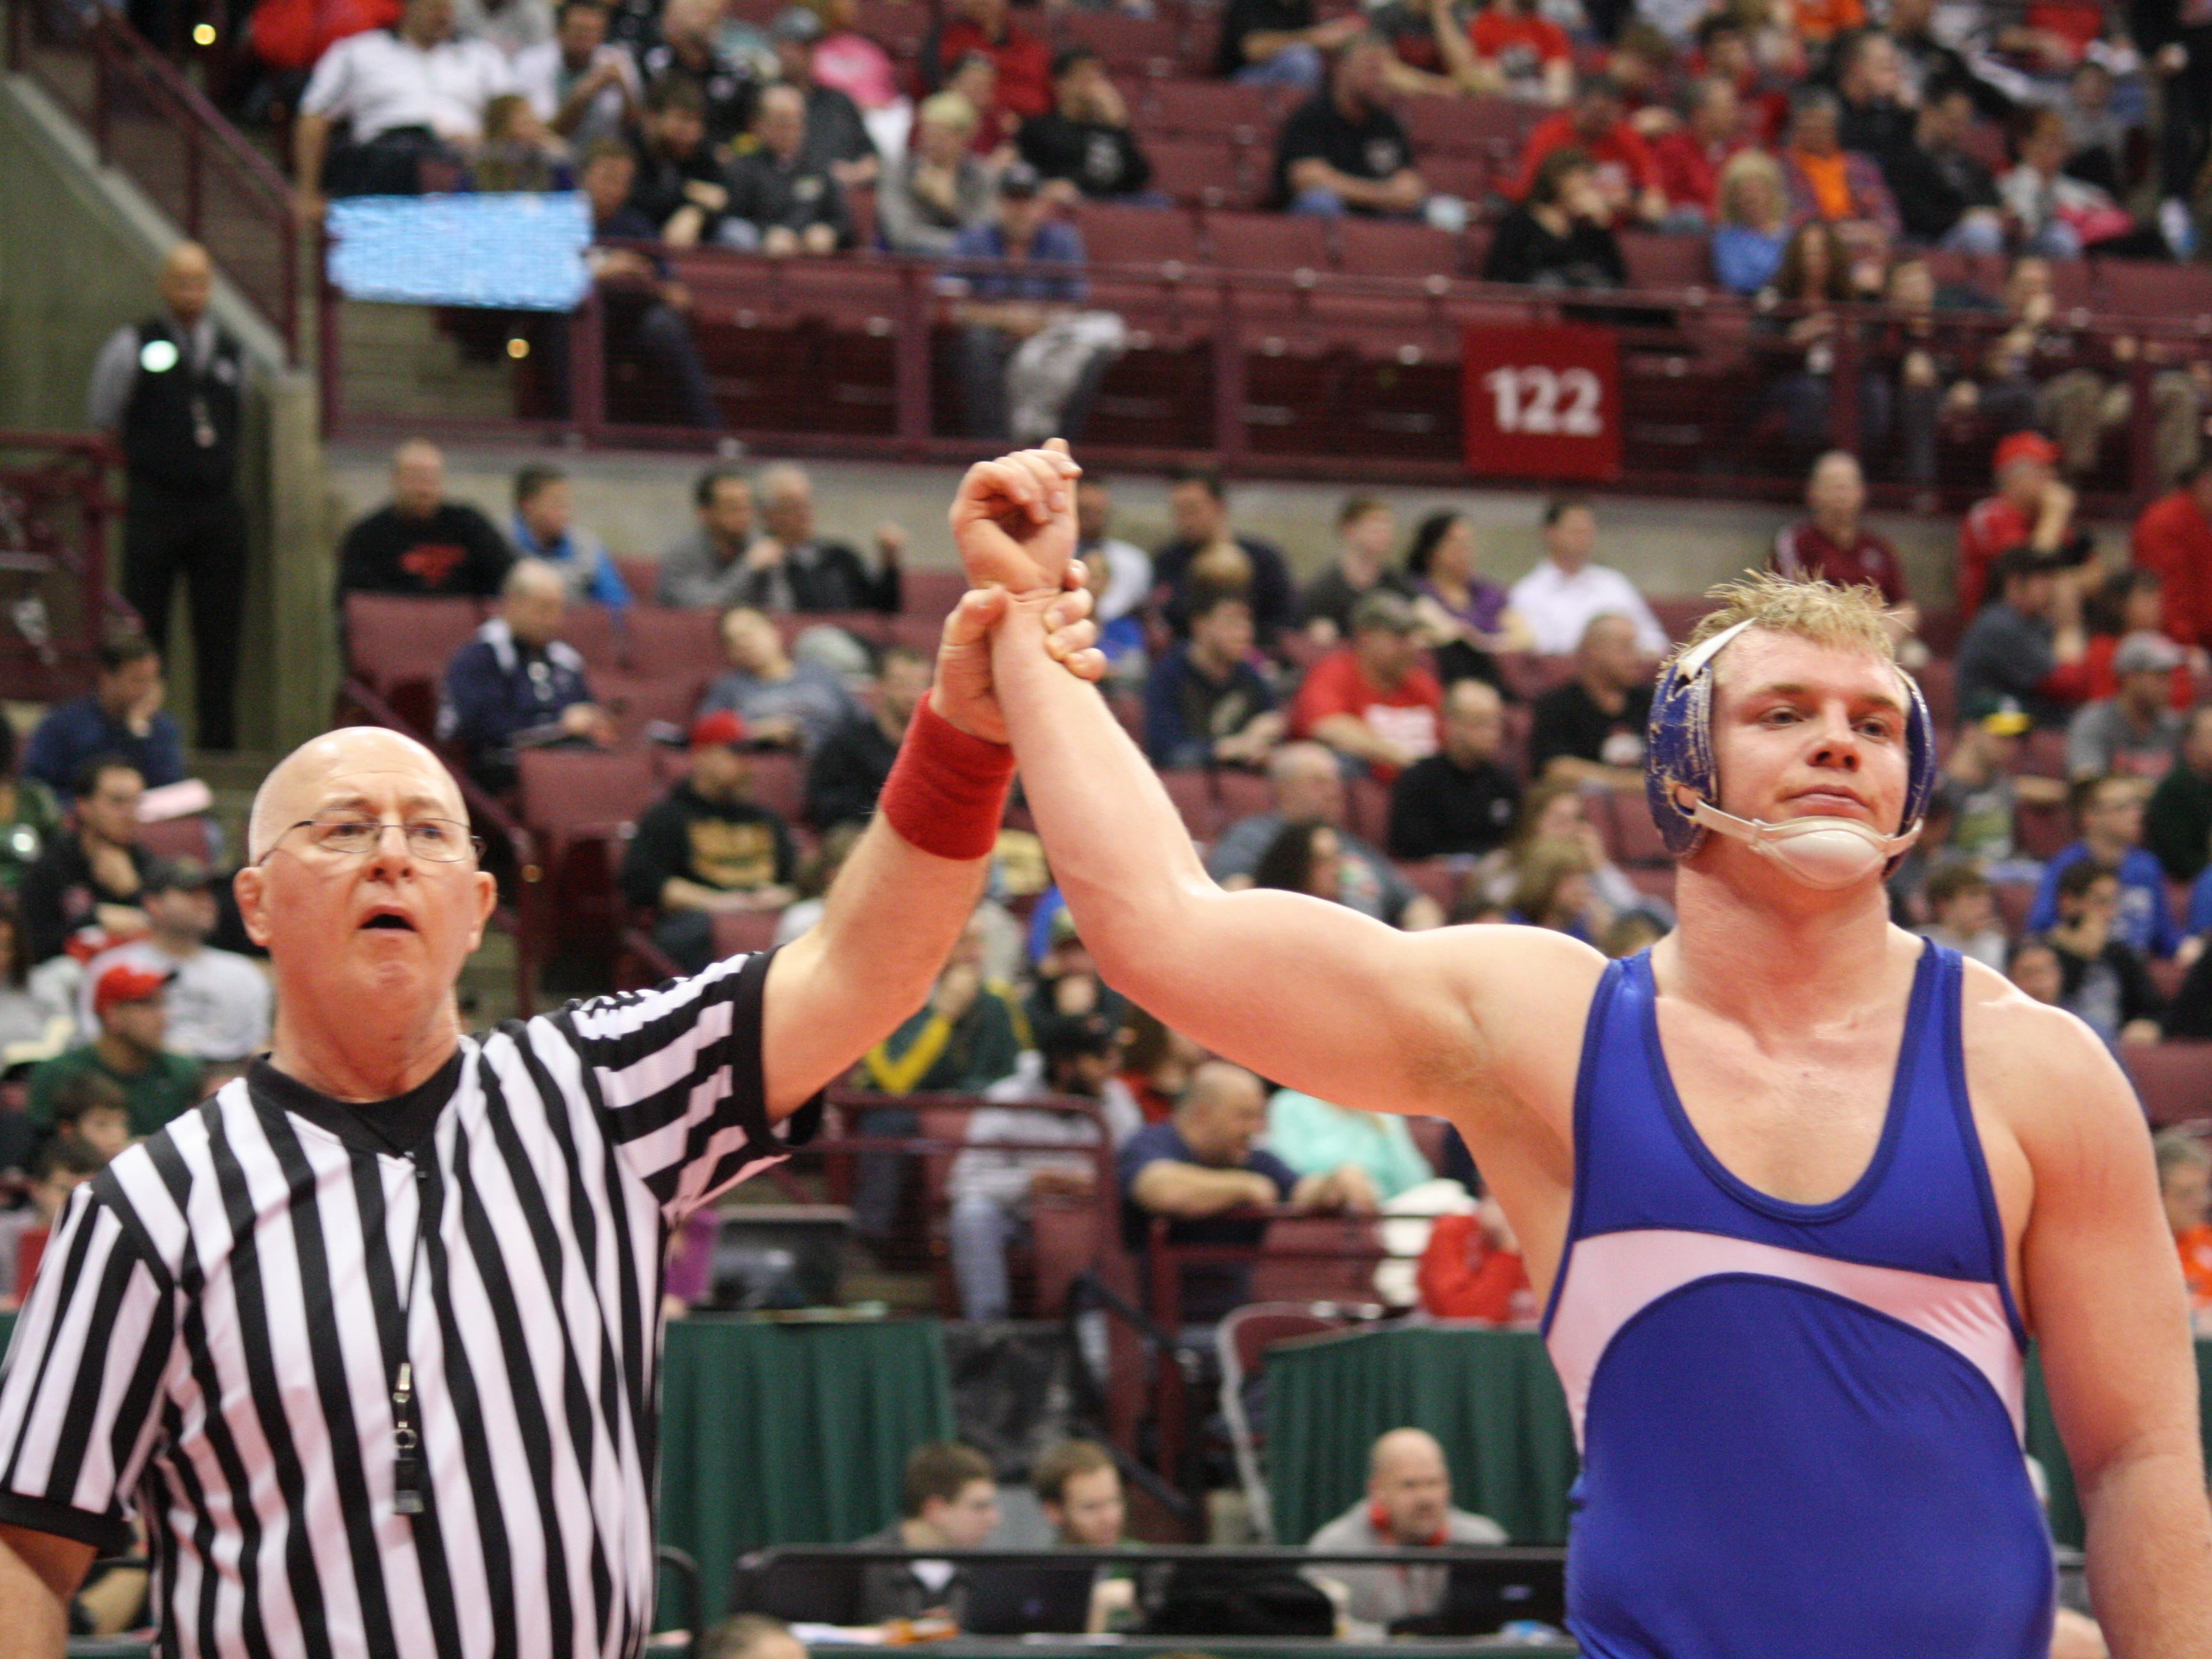 St. Xavier senior Cole Jones won his Division I semifinal at 220 pounds to make it to the state final March 13 in Columbus. On March 14, Jones won the state title 3-1 in overtime.